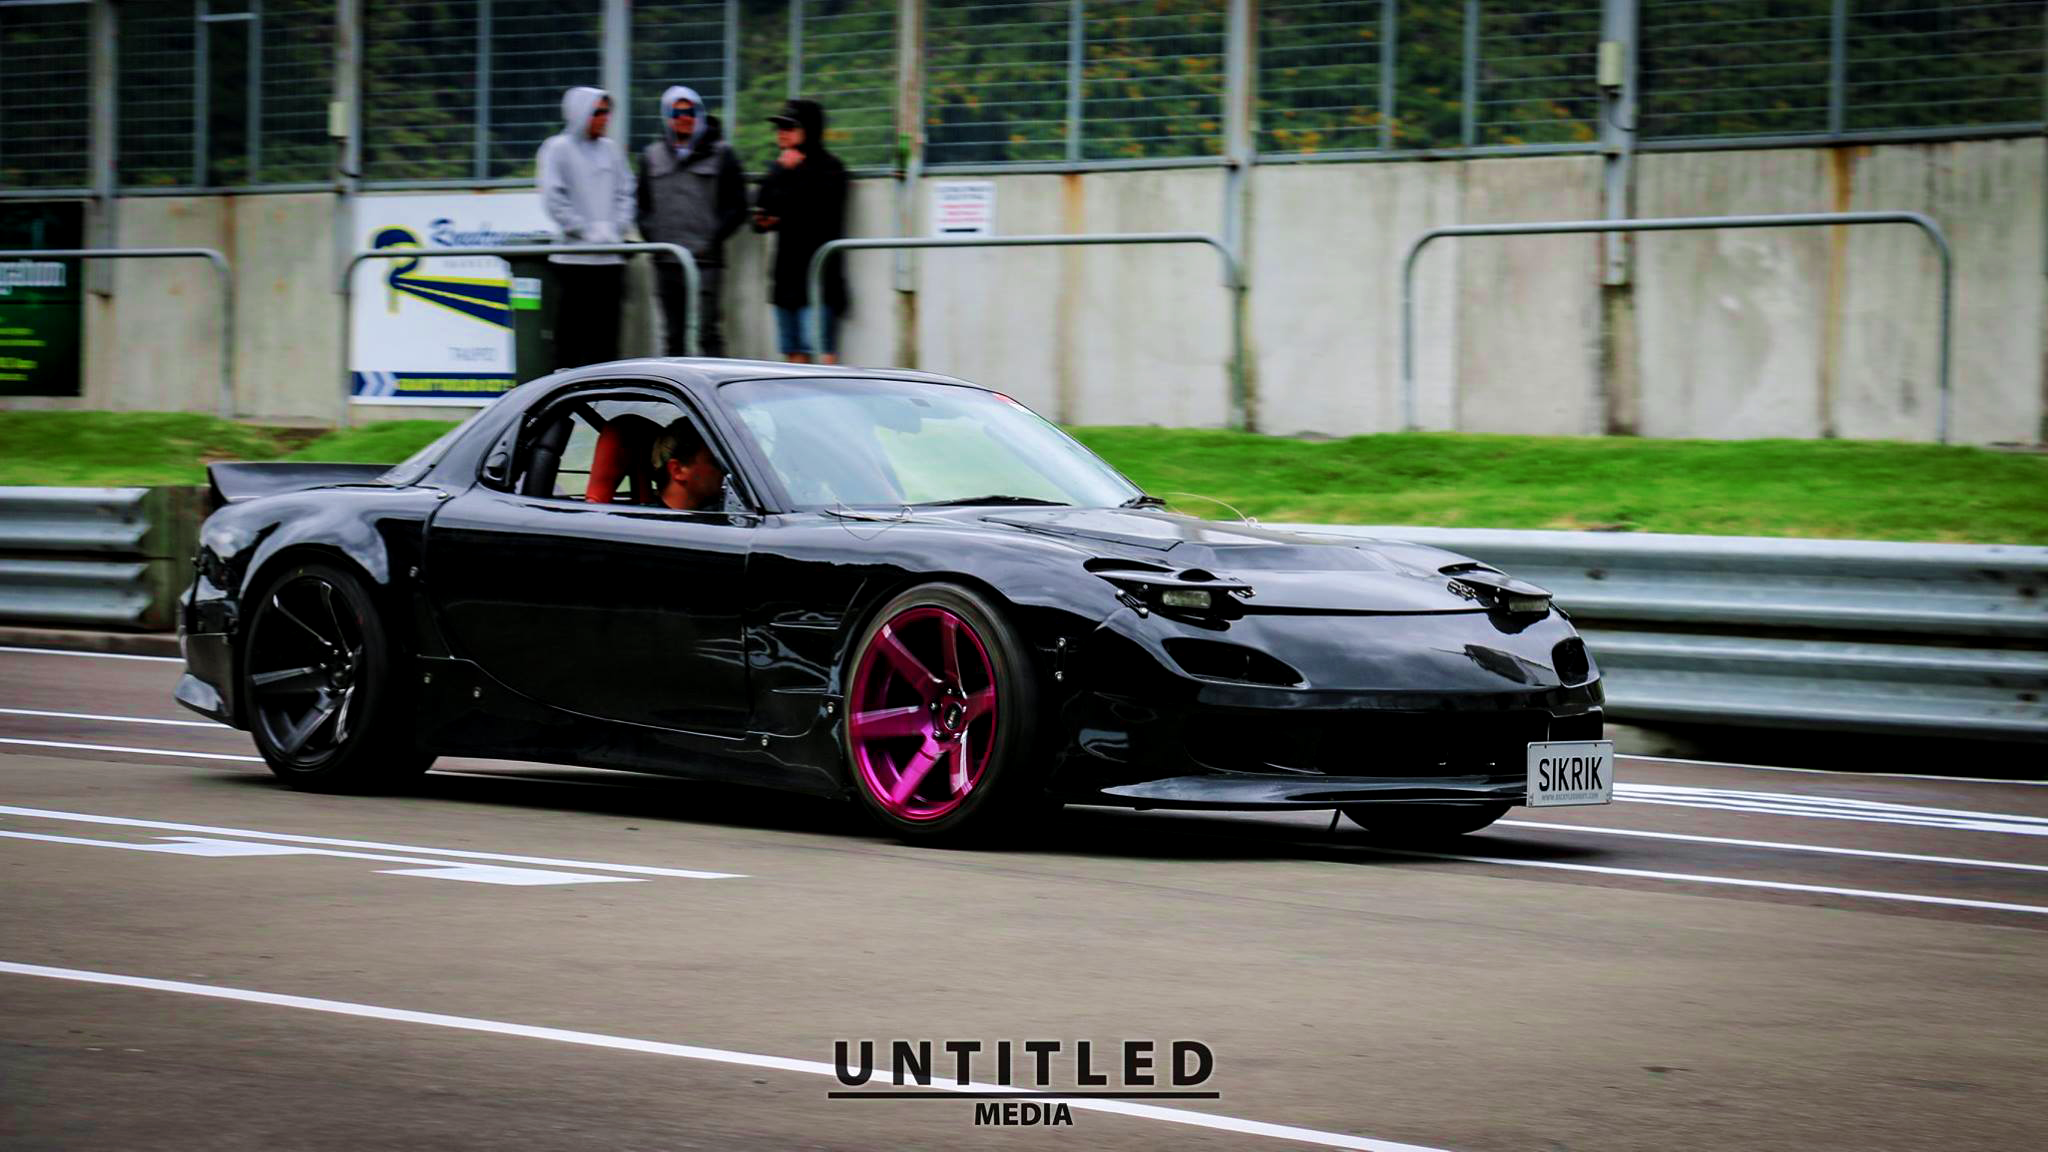 General 2048x1152 Untitled Media Japanese cars photography car vehicle black cars pop-up headlights Mazda RX-7 colored wheels